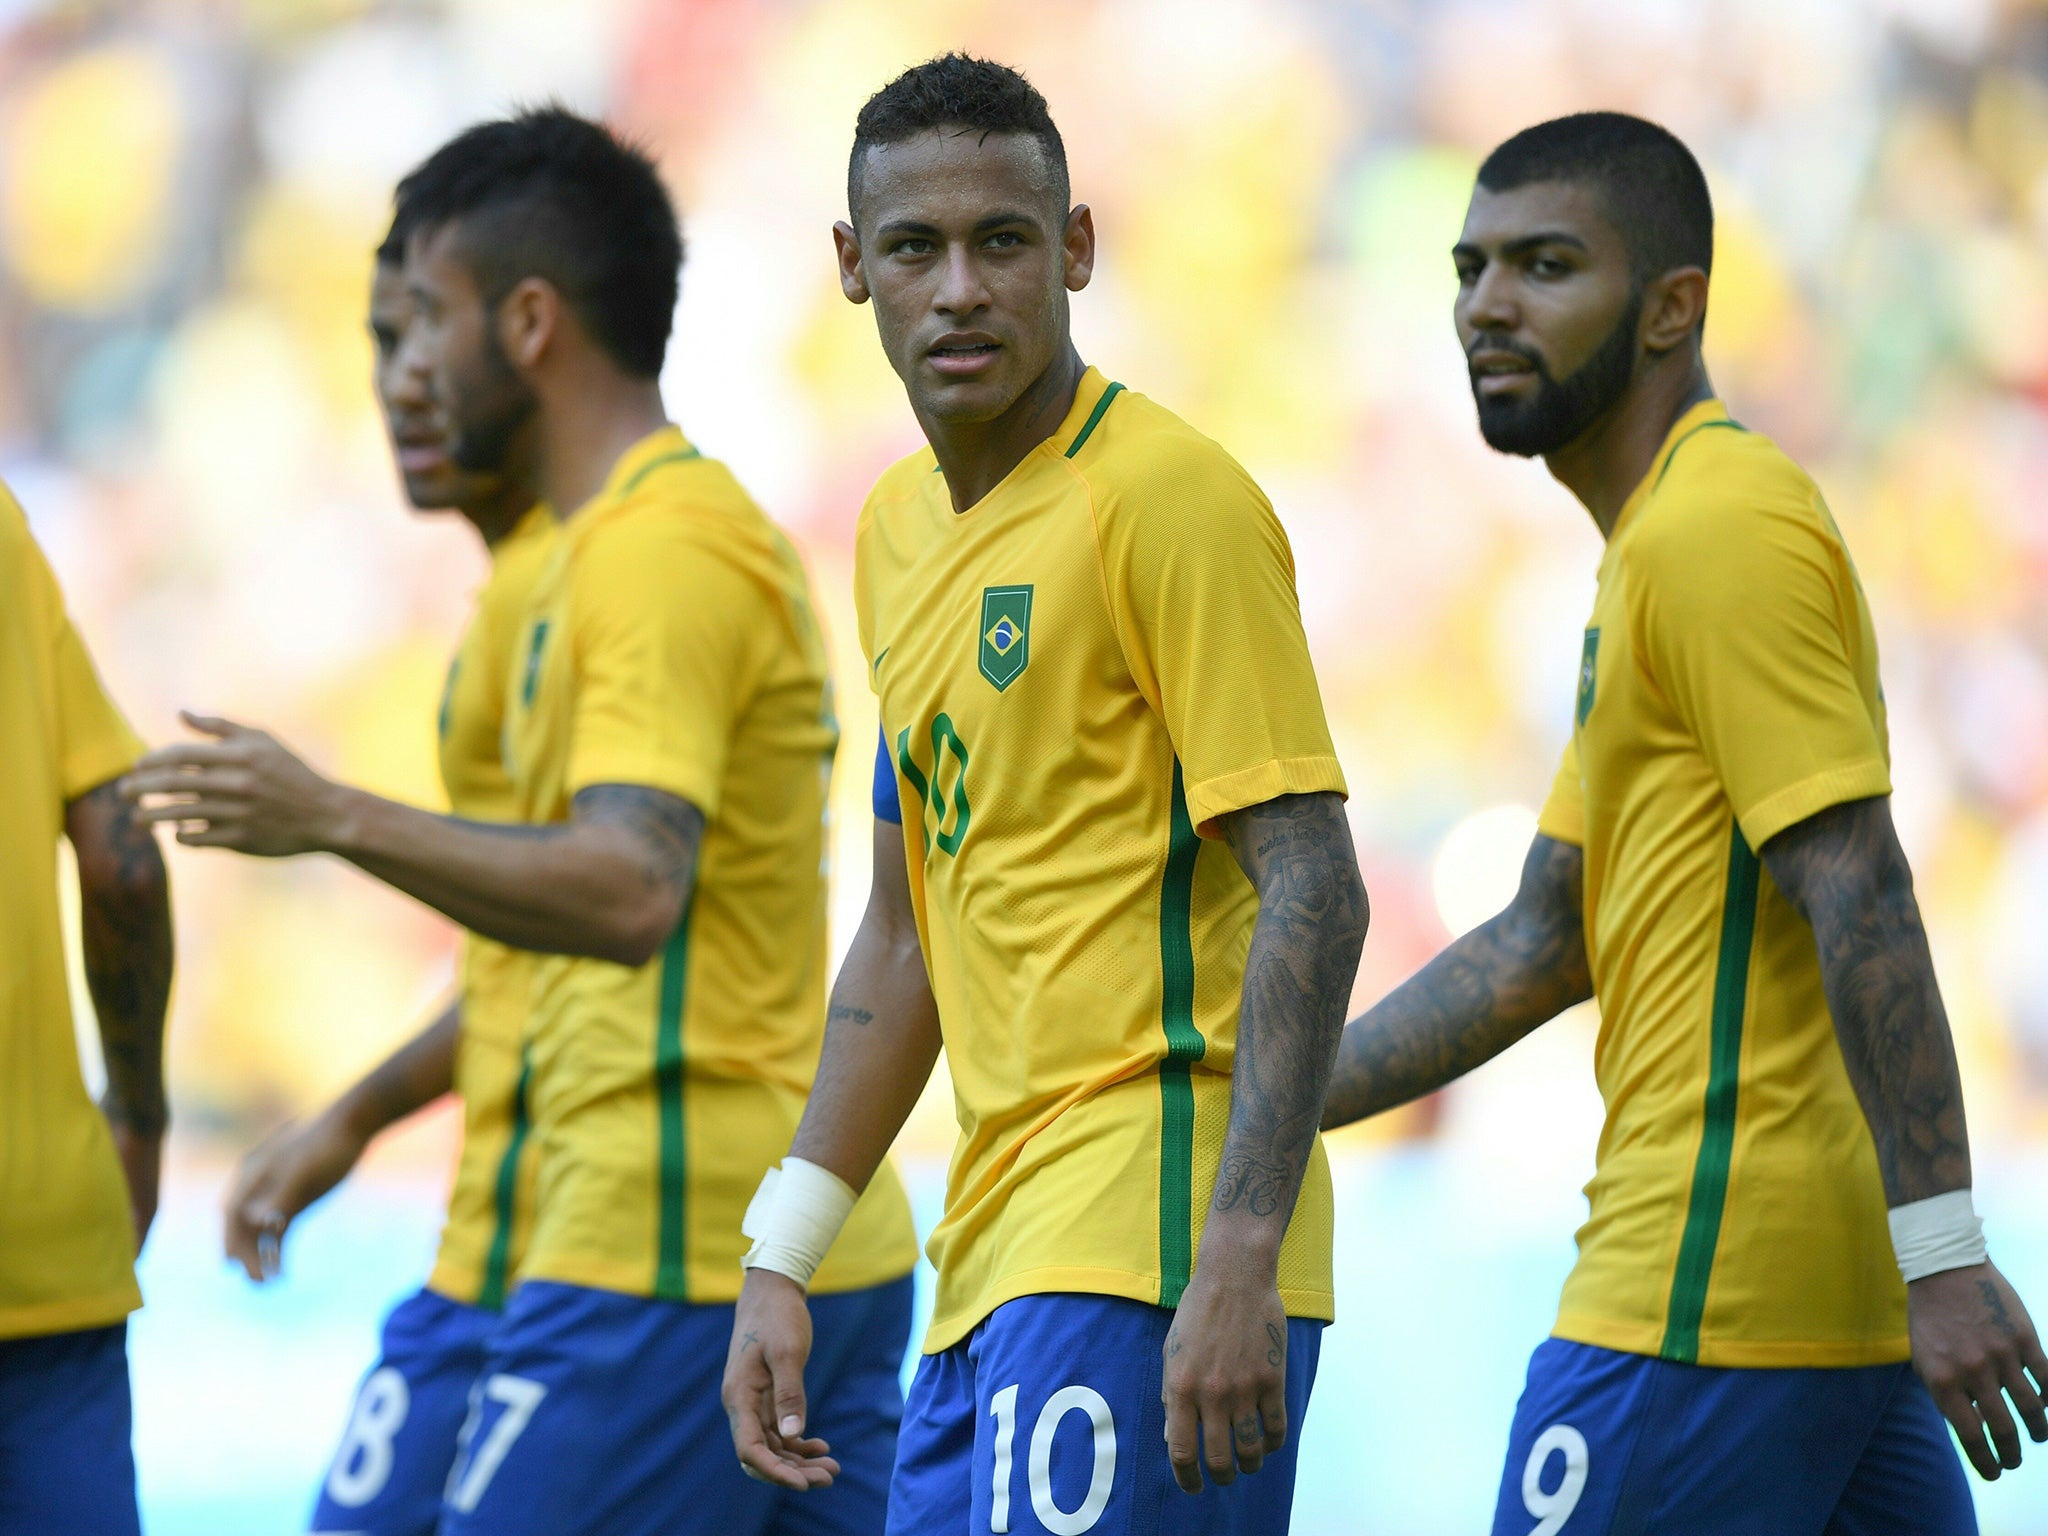 Neymar was spared inclusion in the 7-1 demolition two years ago